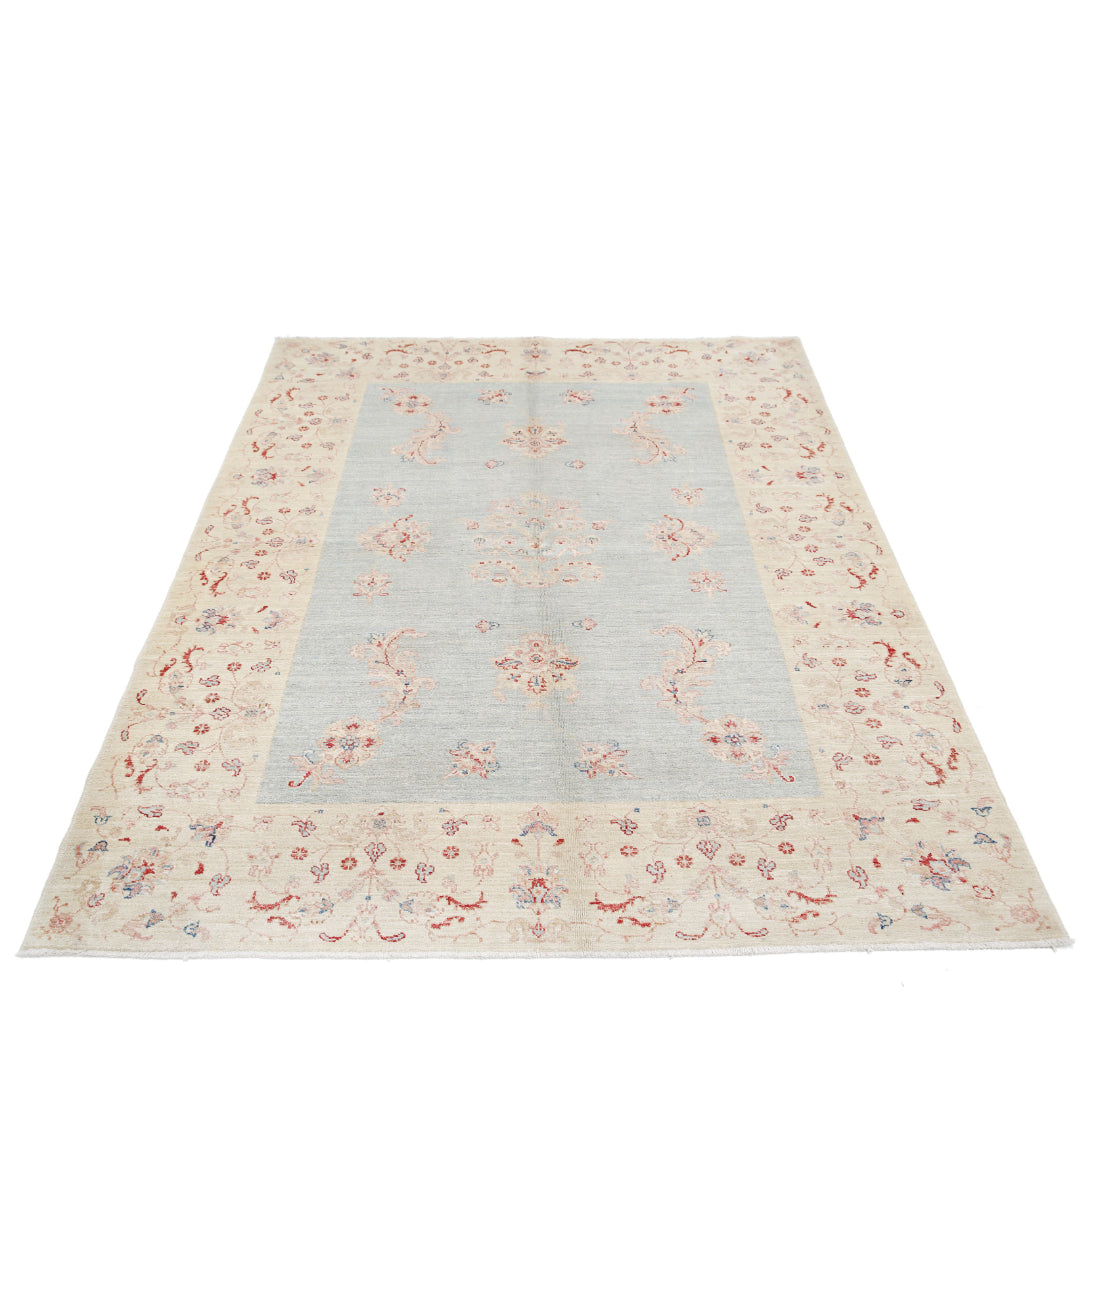 Hand Knotted Serenity Wool Rug - 5'2'' x 6'9'' 5'2'' x 6'9'' (155 X 203) / Blue / Ivory